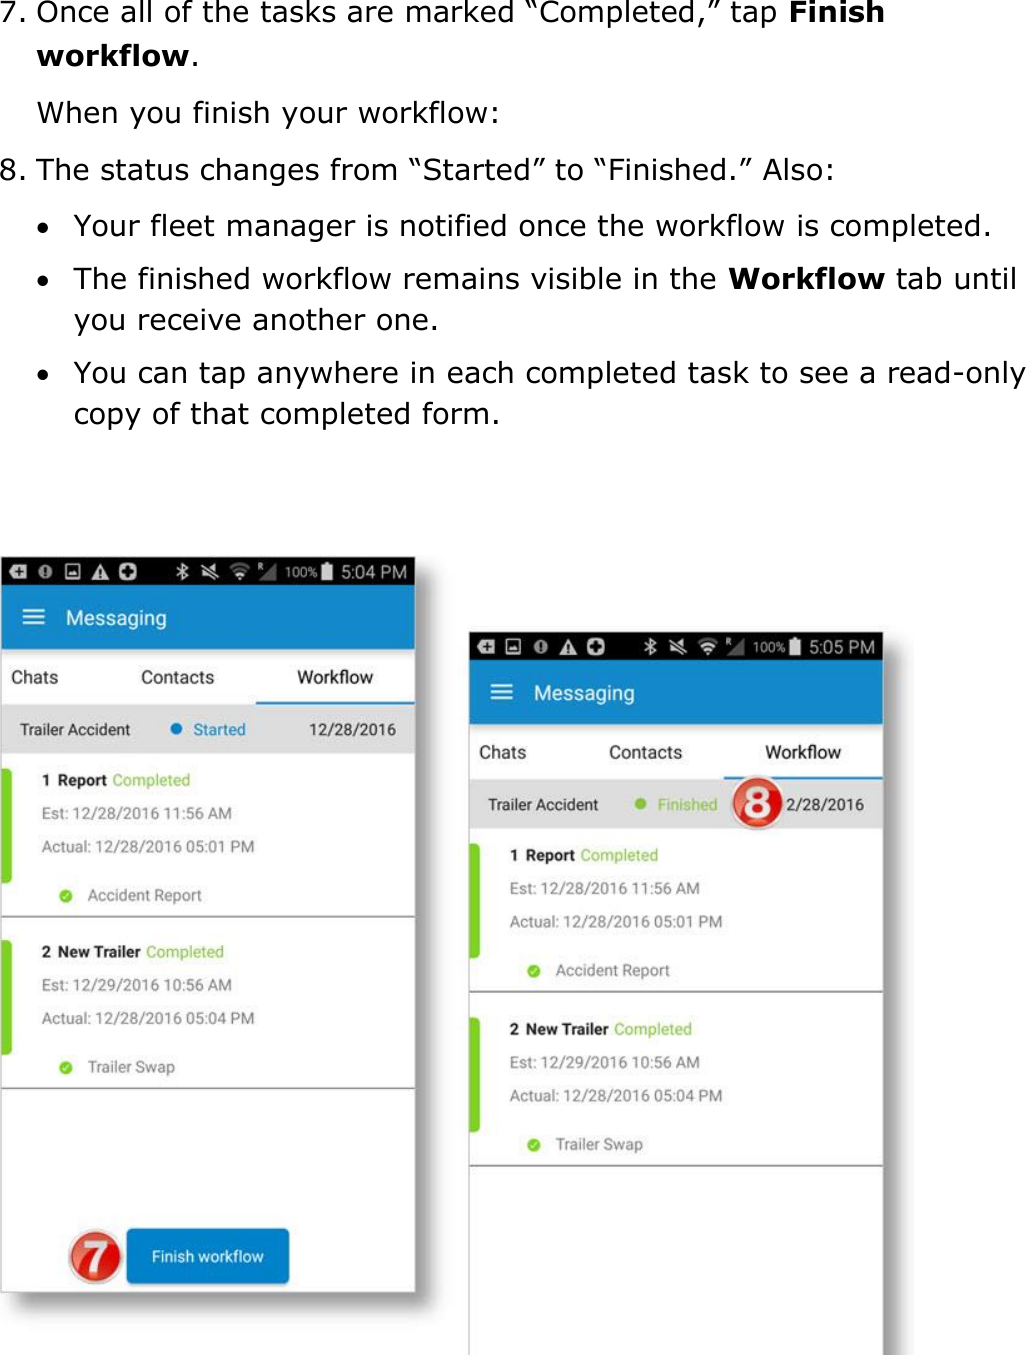 Send Messages, Forms, and Workflows DriverConnect User Guide  79 © 2016-2017, Rand McNally, Inc. 7. Once all of the tasks are marked “Completed,” tap Finish workflow. When you finish your workflow: 8. The status changes from “Started” to “Finished.” Also:  Your fleet manager is notified once the workflow is completed.  The finished workflow remains visible in the Workflow tab until you receive another one.  You can tap anywhere in each completed task to see a read-only copy of that completed form.  